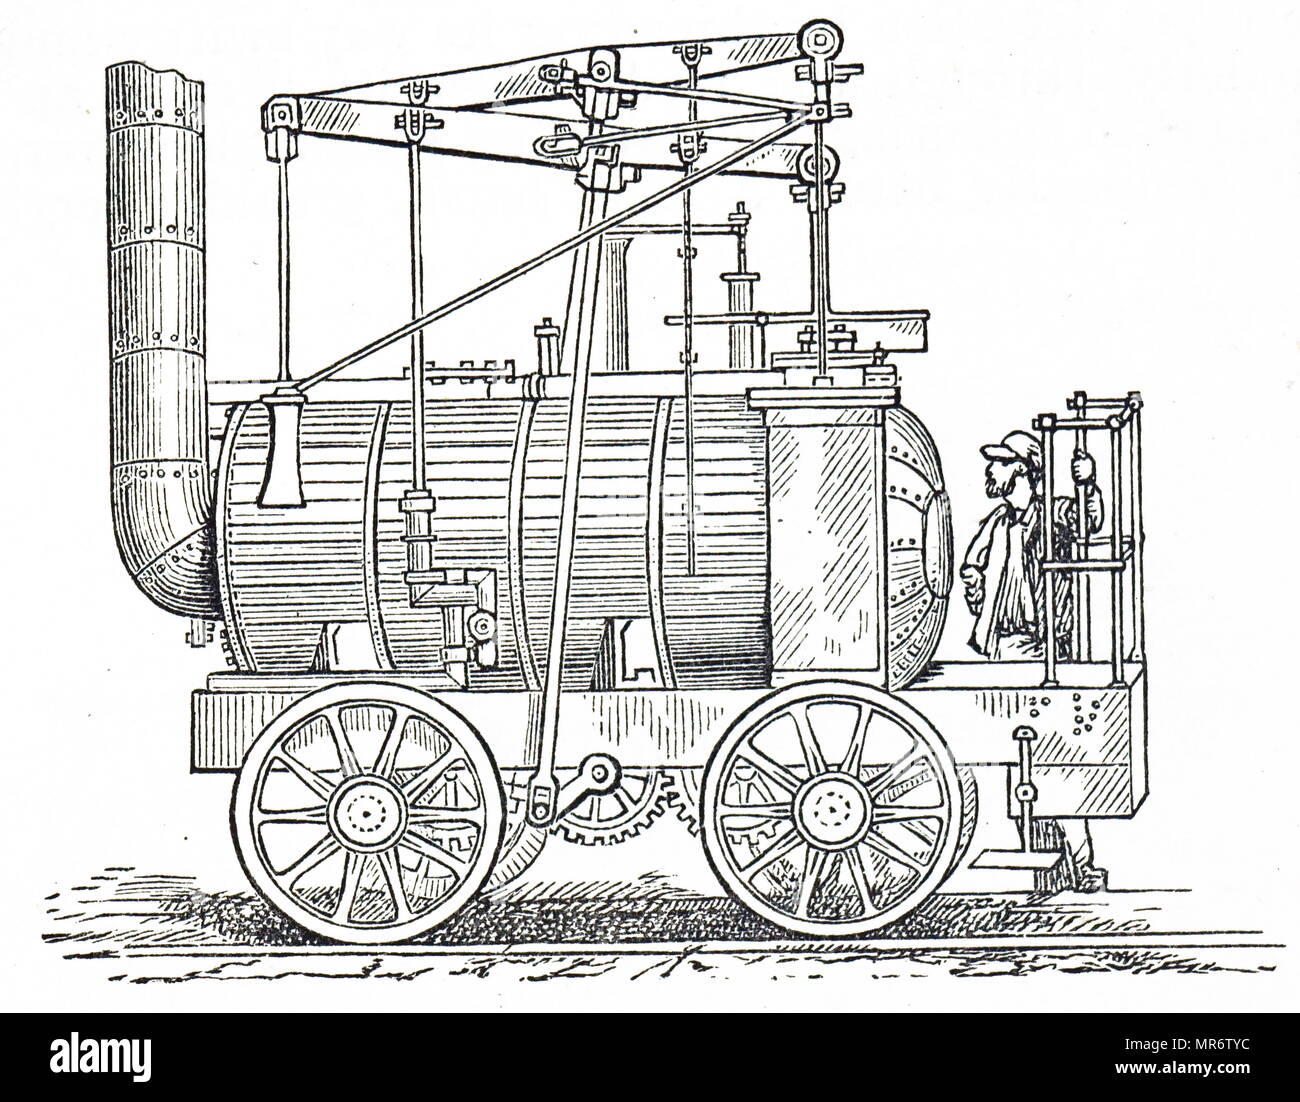 Engraving depicting William Hedley's 'Puffing Billy'. William Hedley (1779-1843) an English railway engineer. Dated 19th century Stock Photo